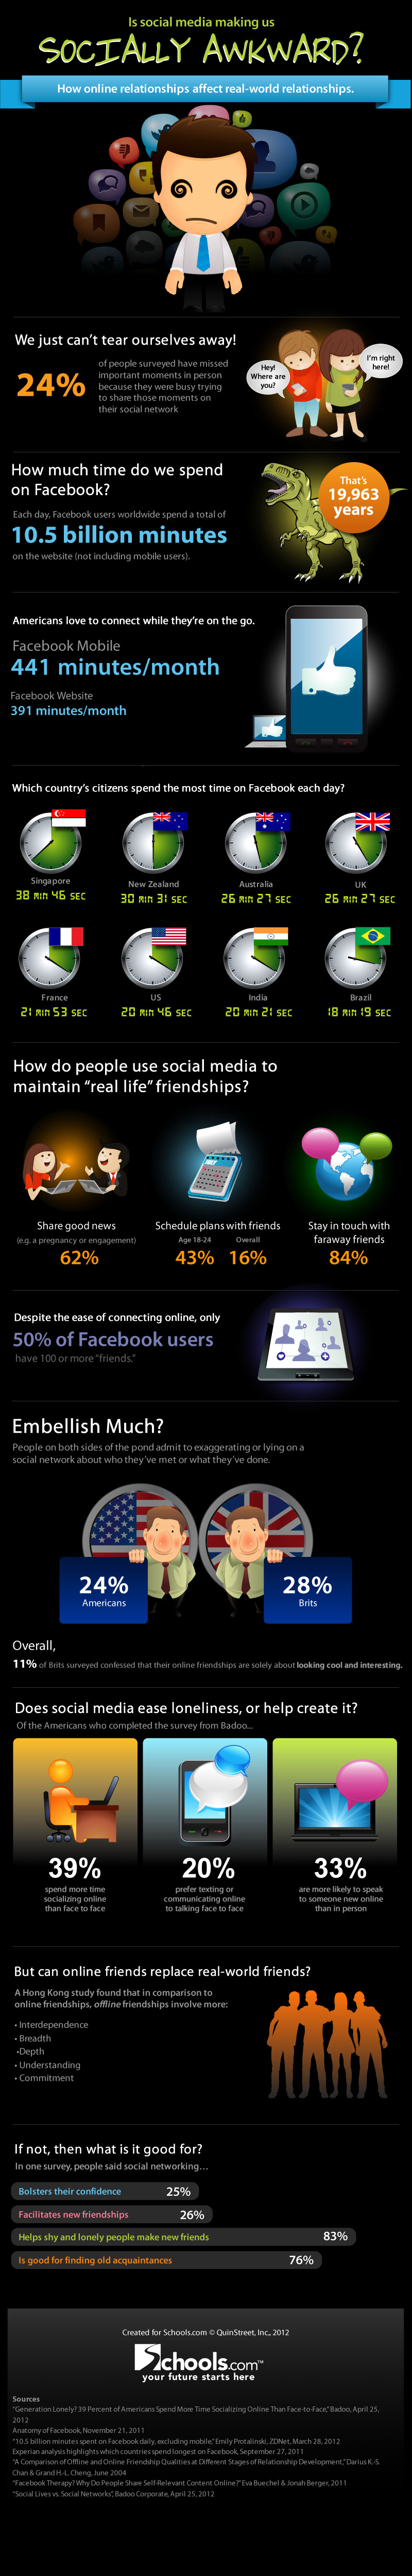 Social-media-for-antisocial-people-infographic